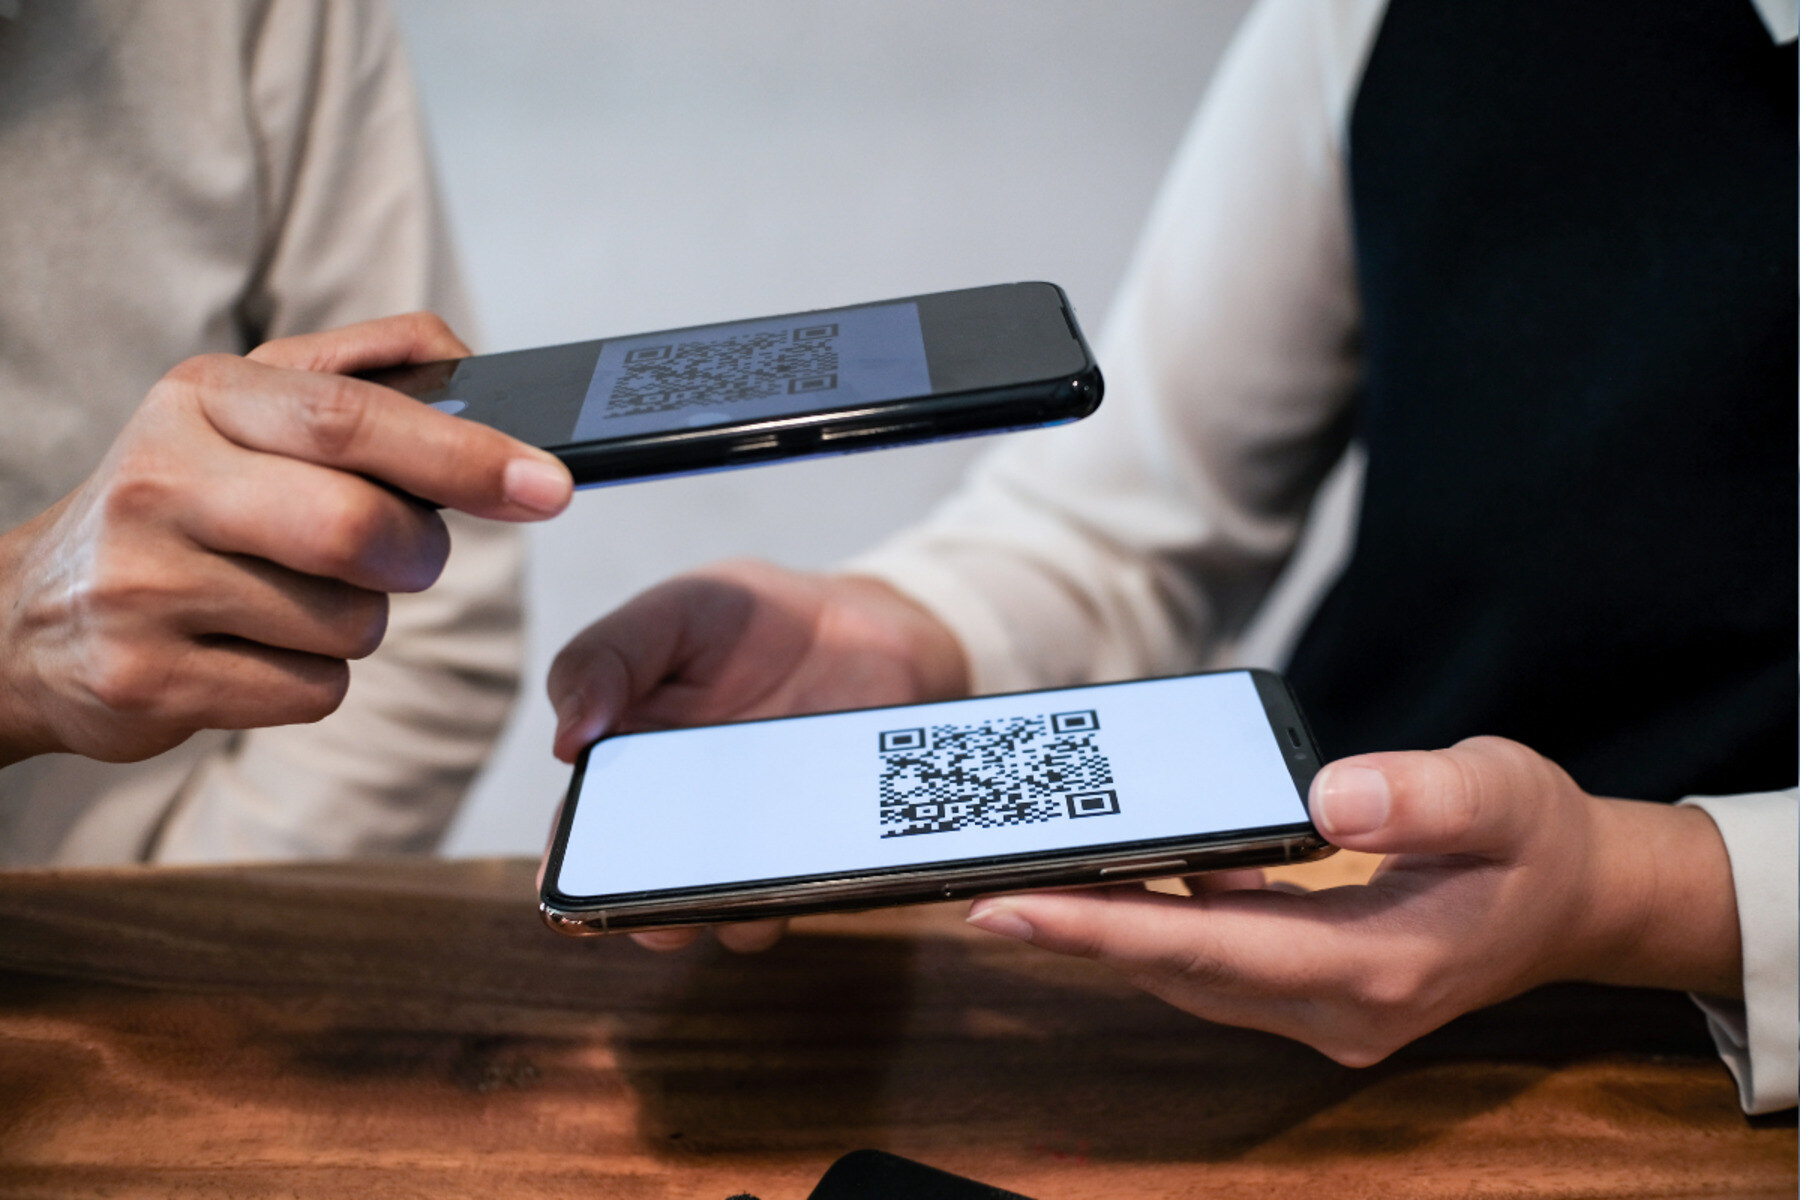 Seamless Connectivity: Scanning QR Codes On OnePlus 8